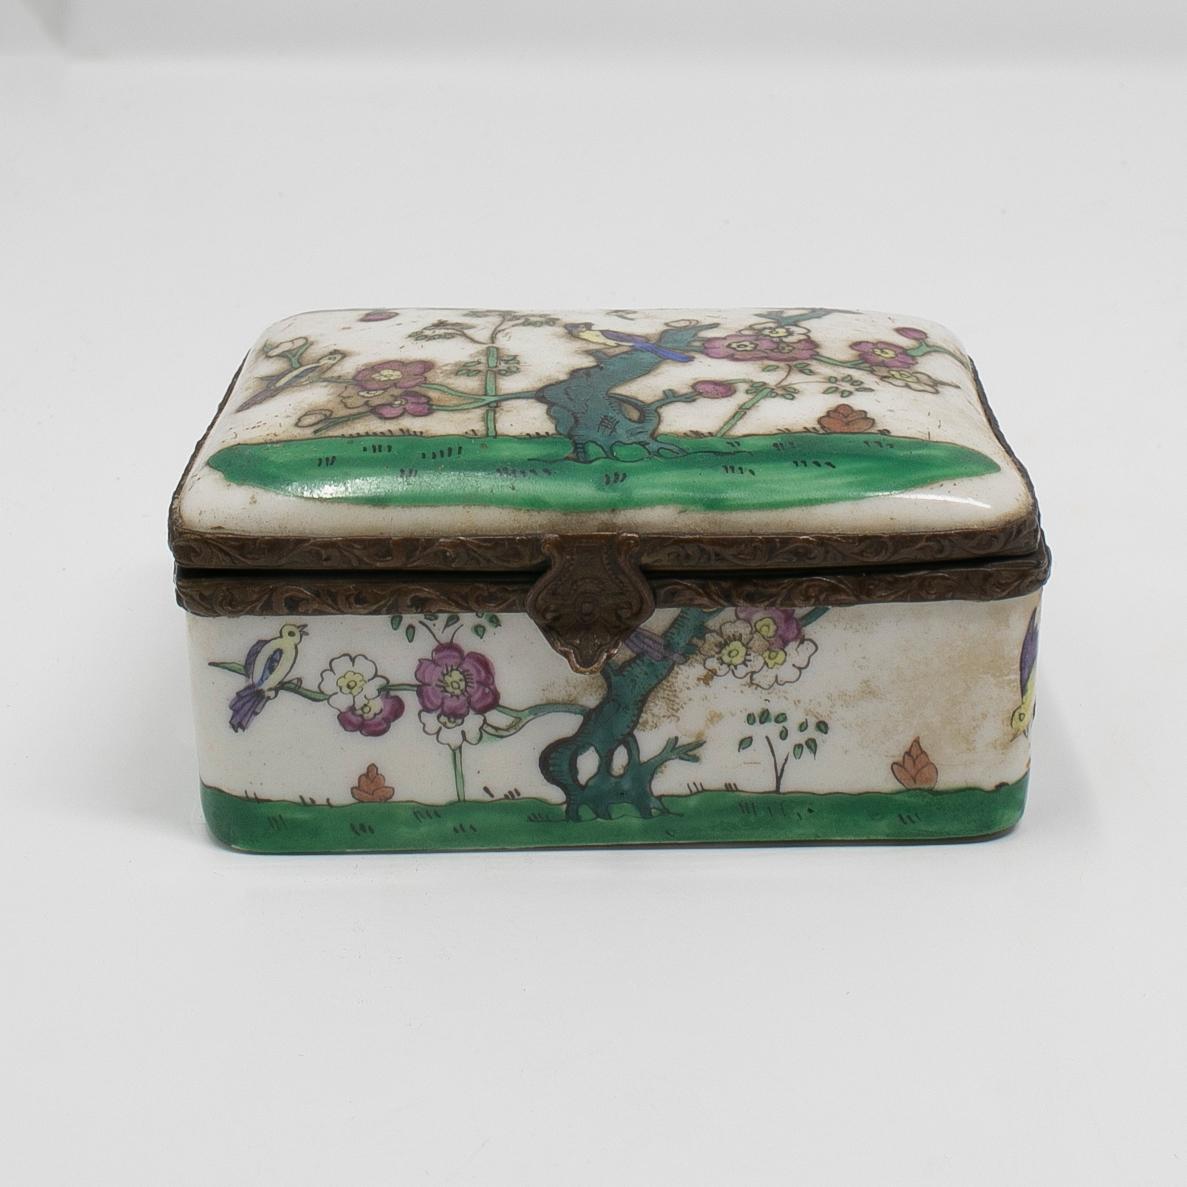 19th century French porcelain and brass trinket box with flower decorations.